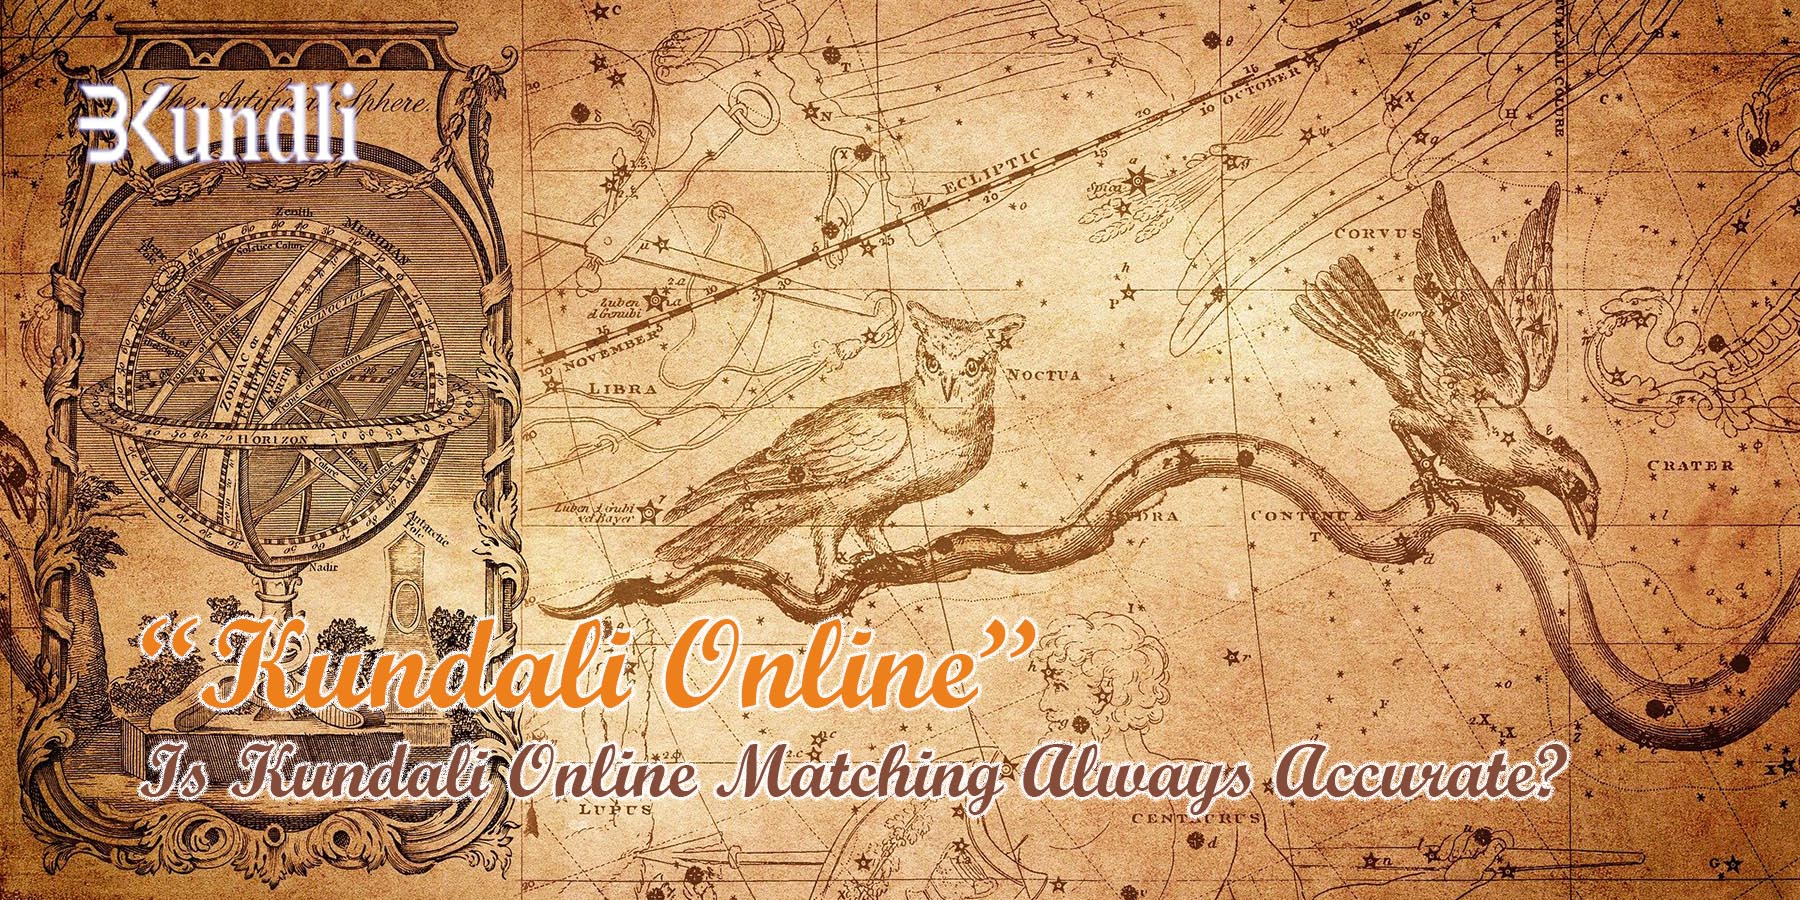 Is Kundali Online Matching Always Accurate?